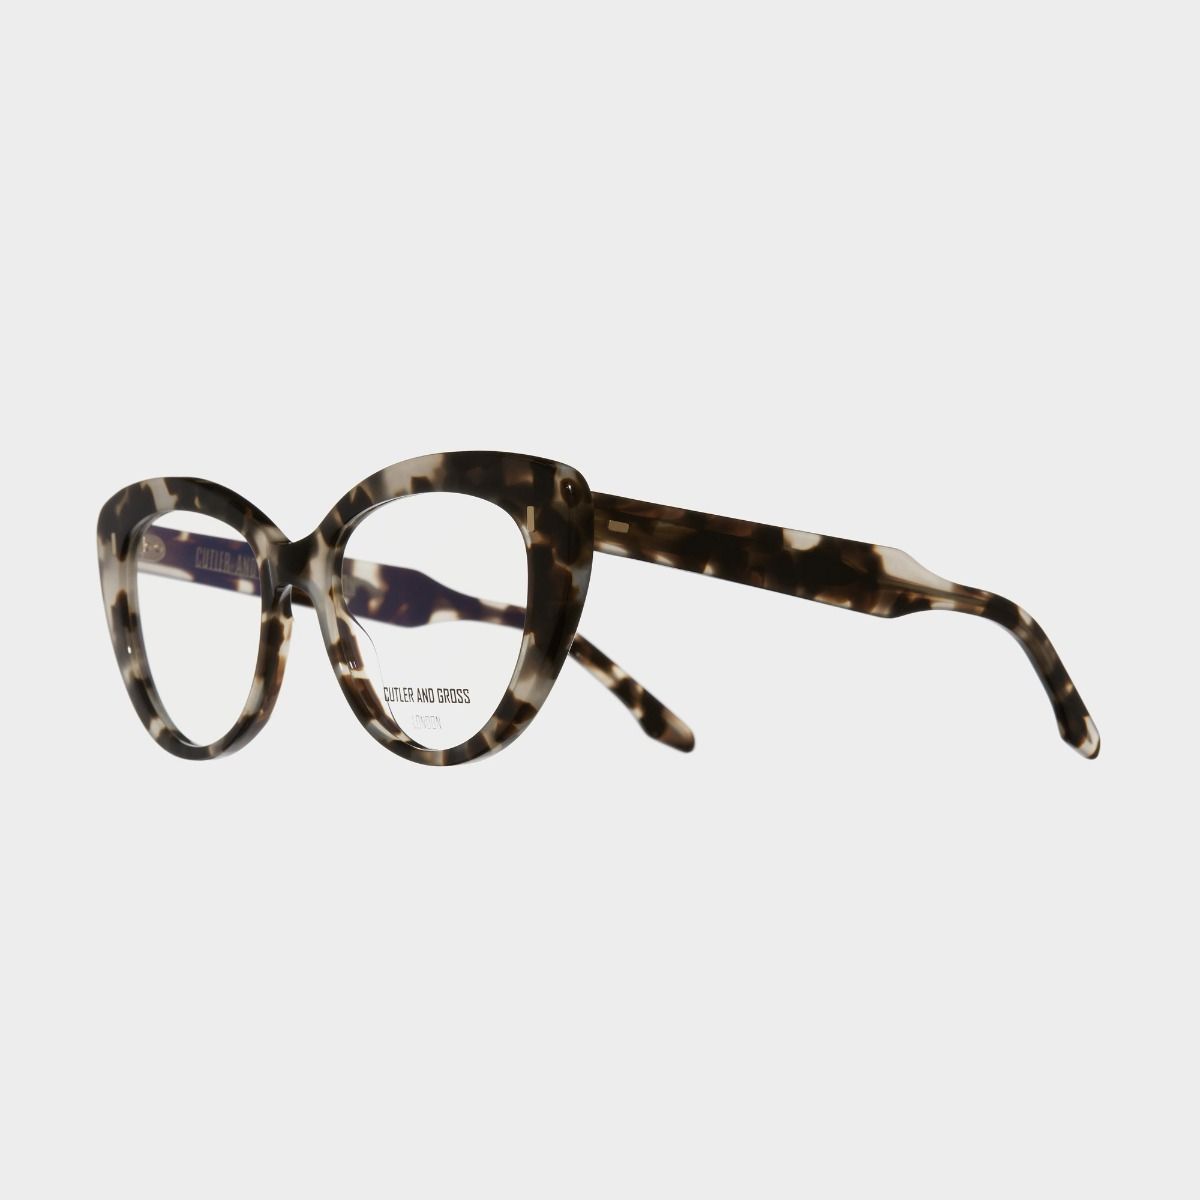 Cutler and Gross, 1350 Optical Cat Eye Glasses - Jet Engine Grey